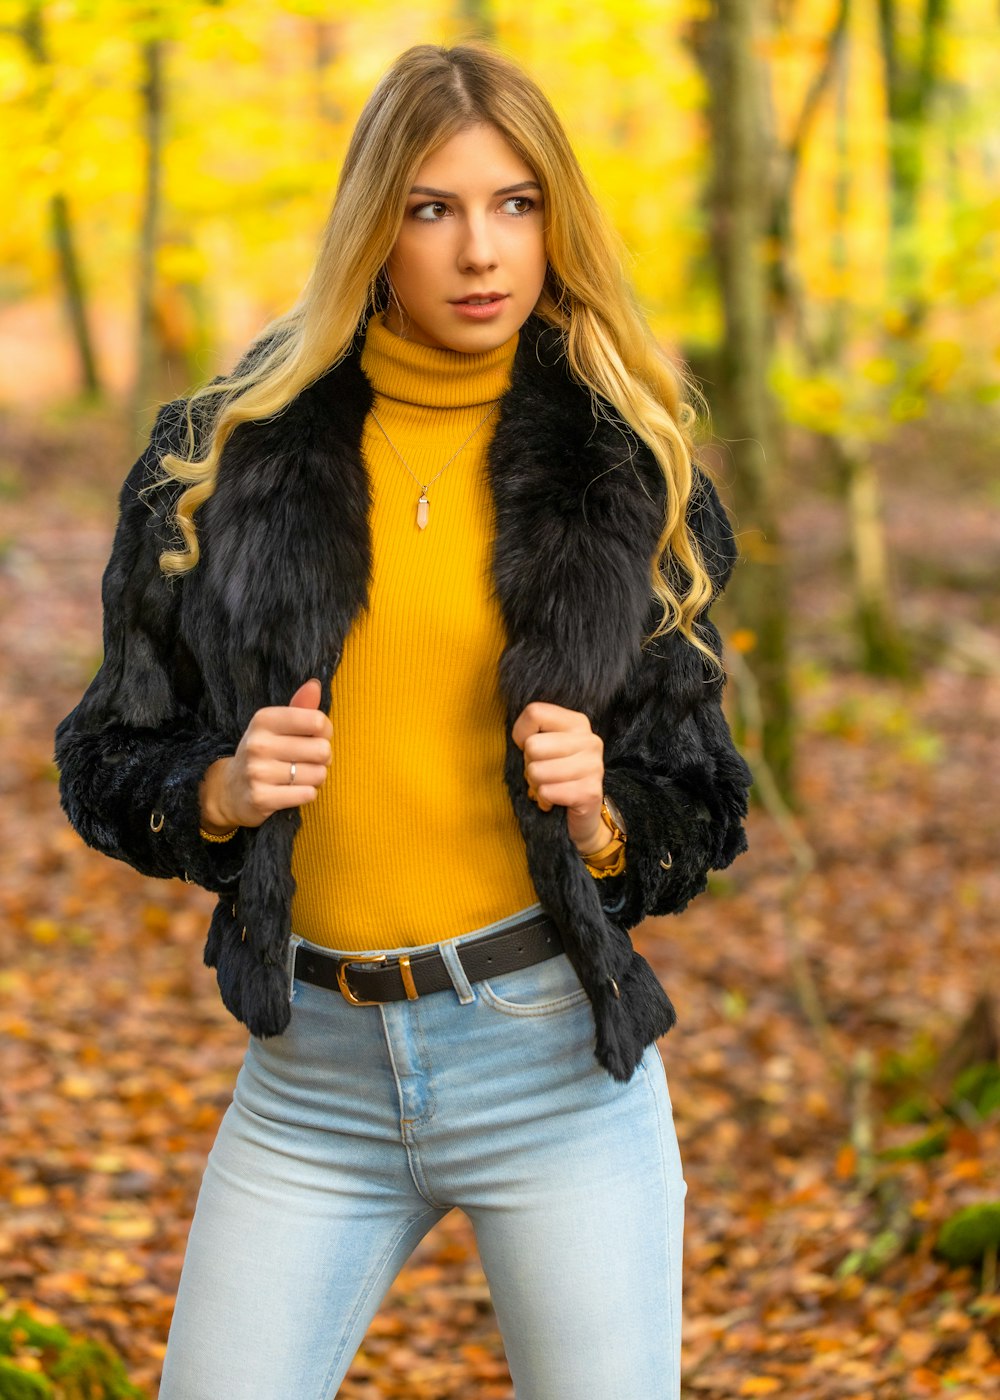 woman in black fur jacket and blue denim jeans standing on dried leaves during daytime